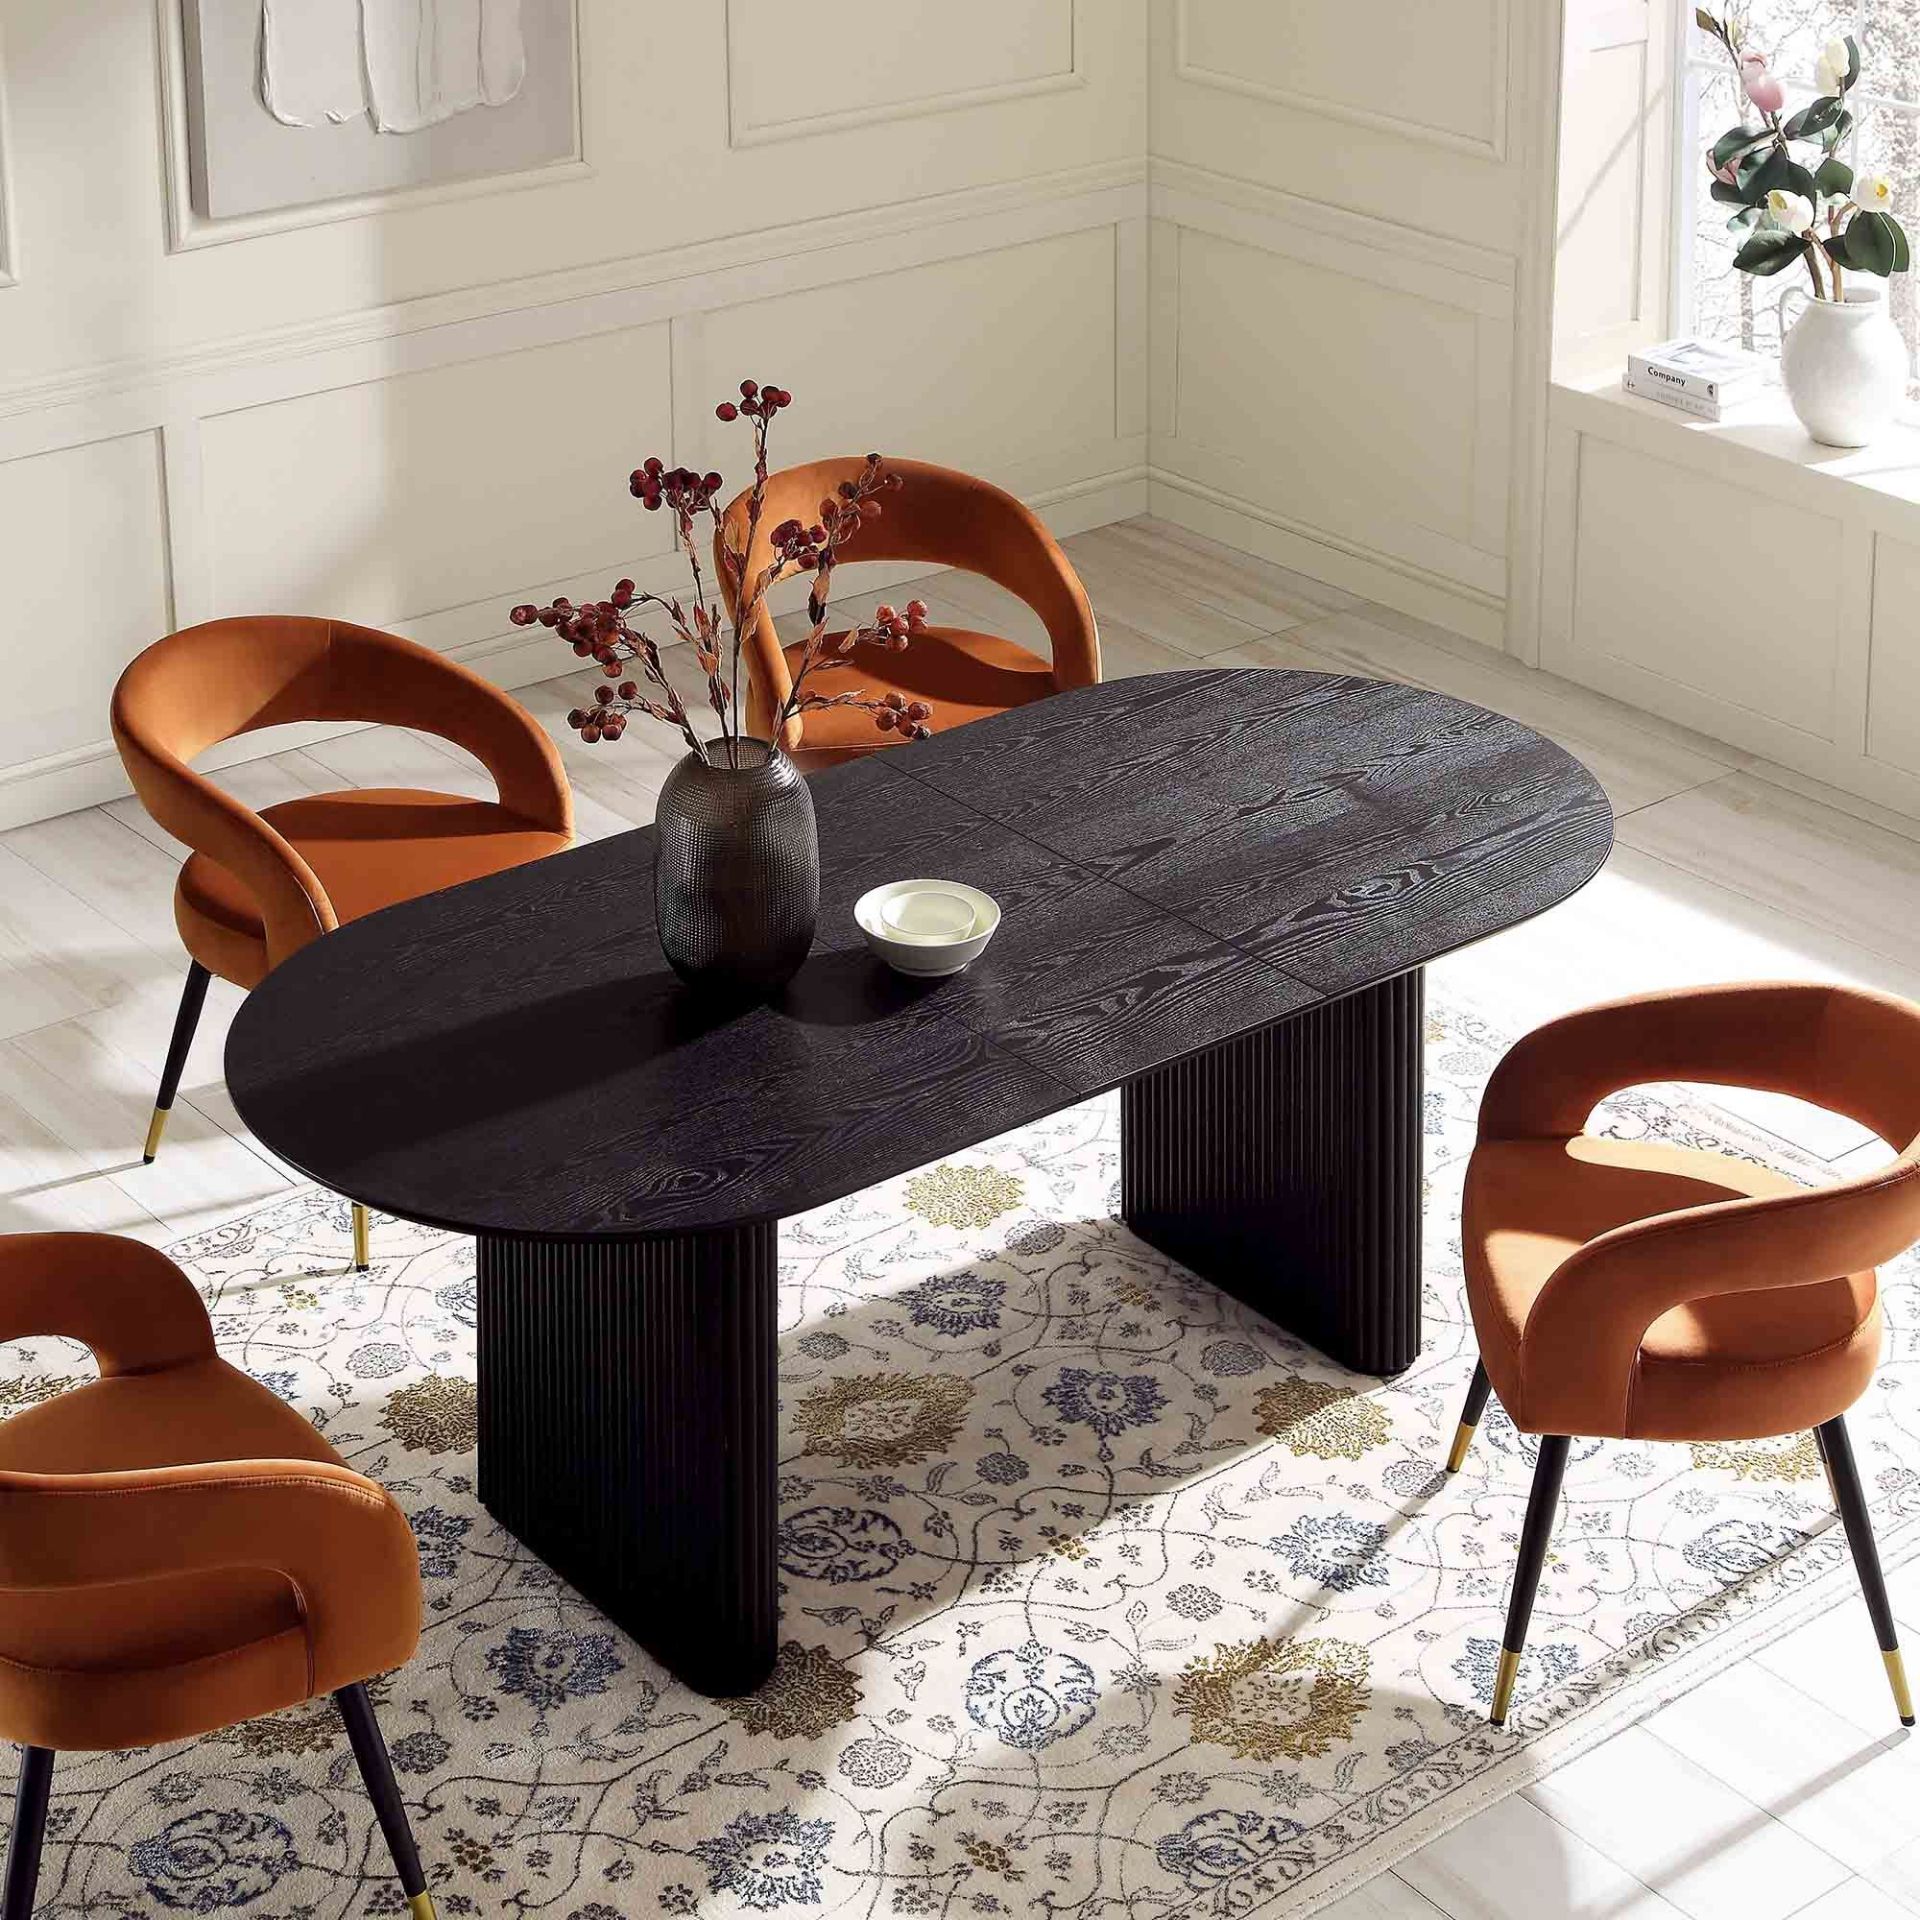 Maru Oval 6-8 Seater Extending Oak Pedestal Dining Table, Black. - R14. RRP £649.99. Our Maru dining